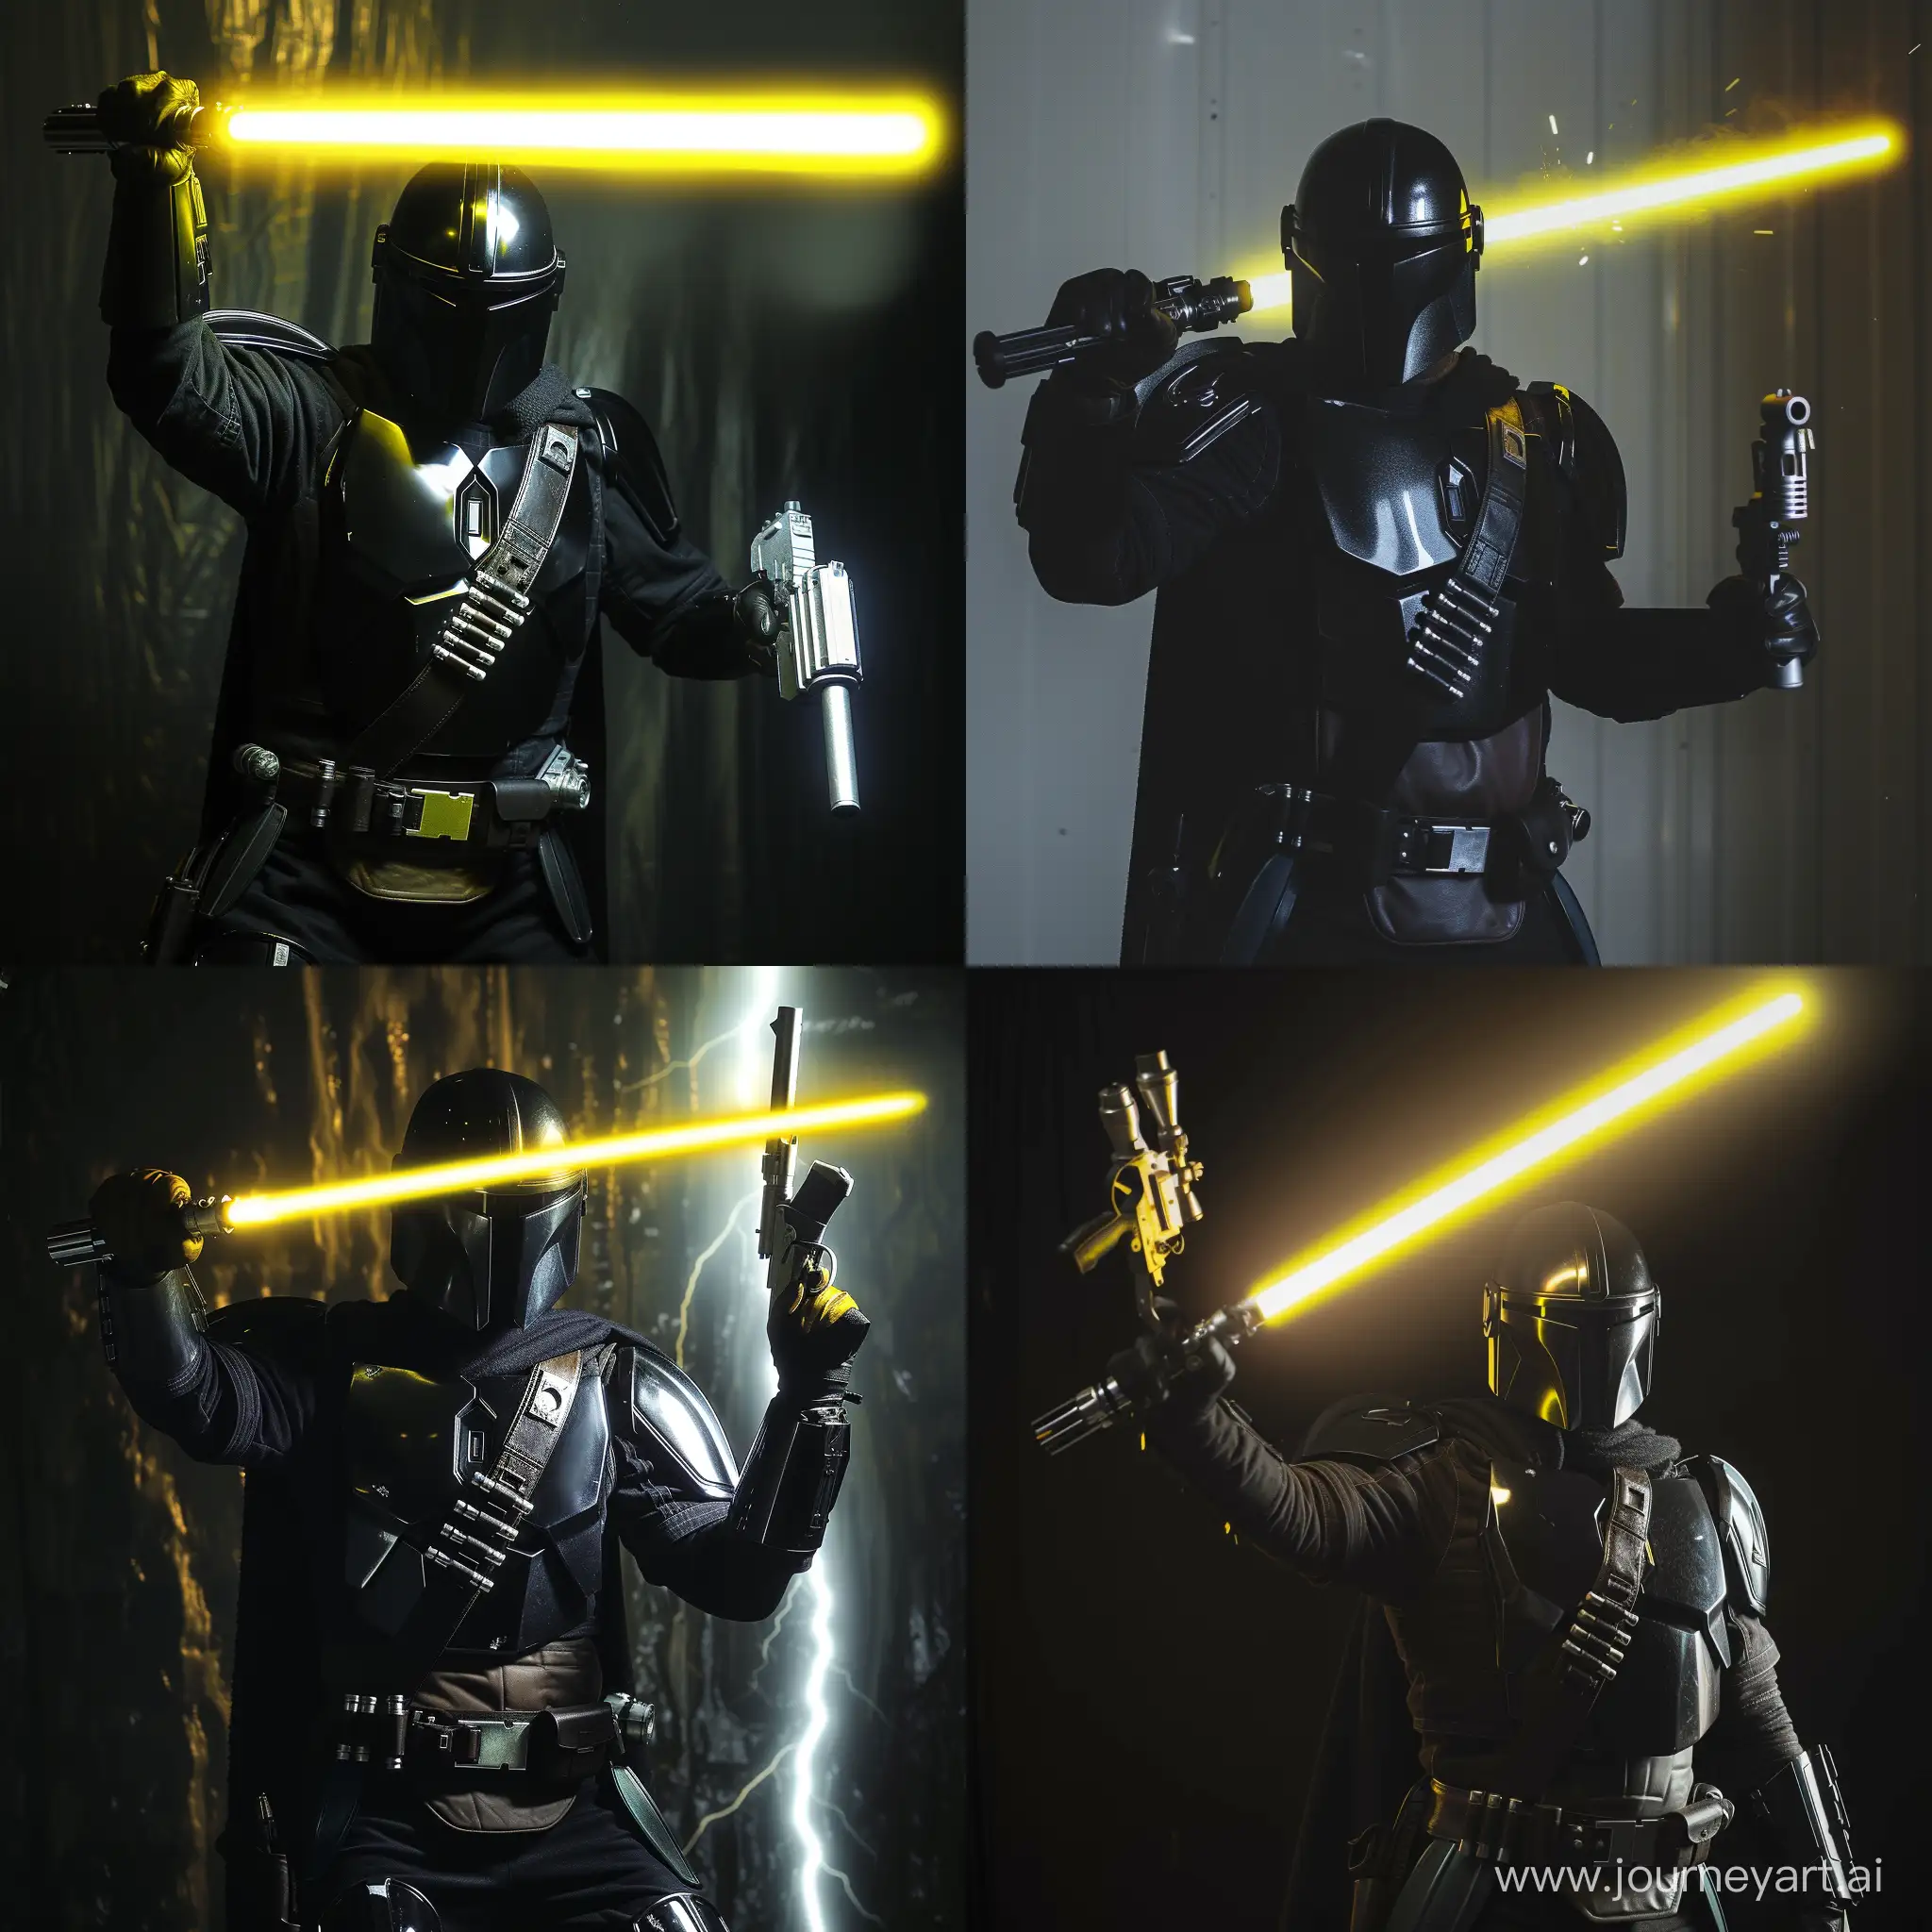 A man in black matte Mandalorian armor, a yellow lightsaber in one hand, a silver future pistol in the other hand, light and darkness behind